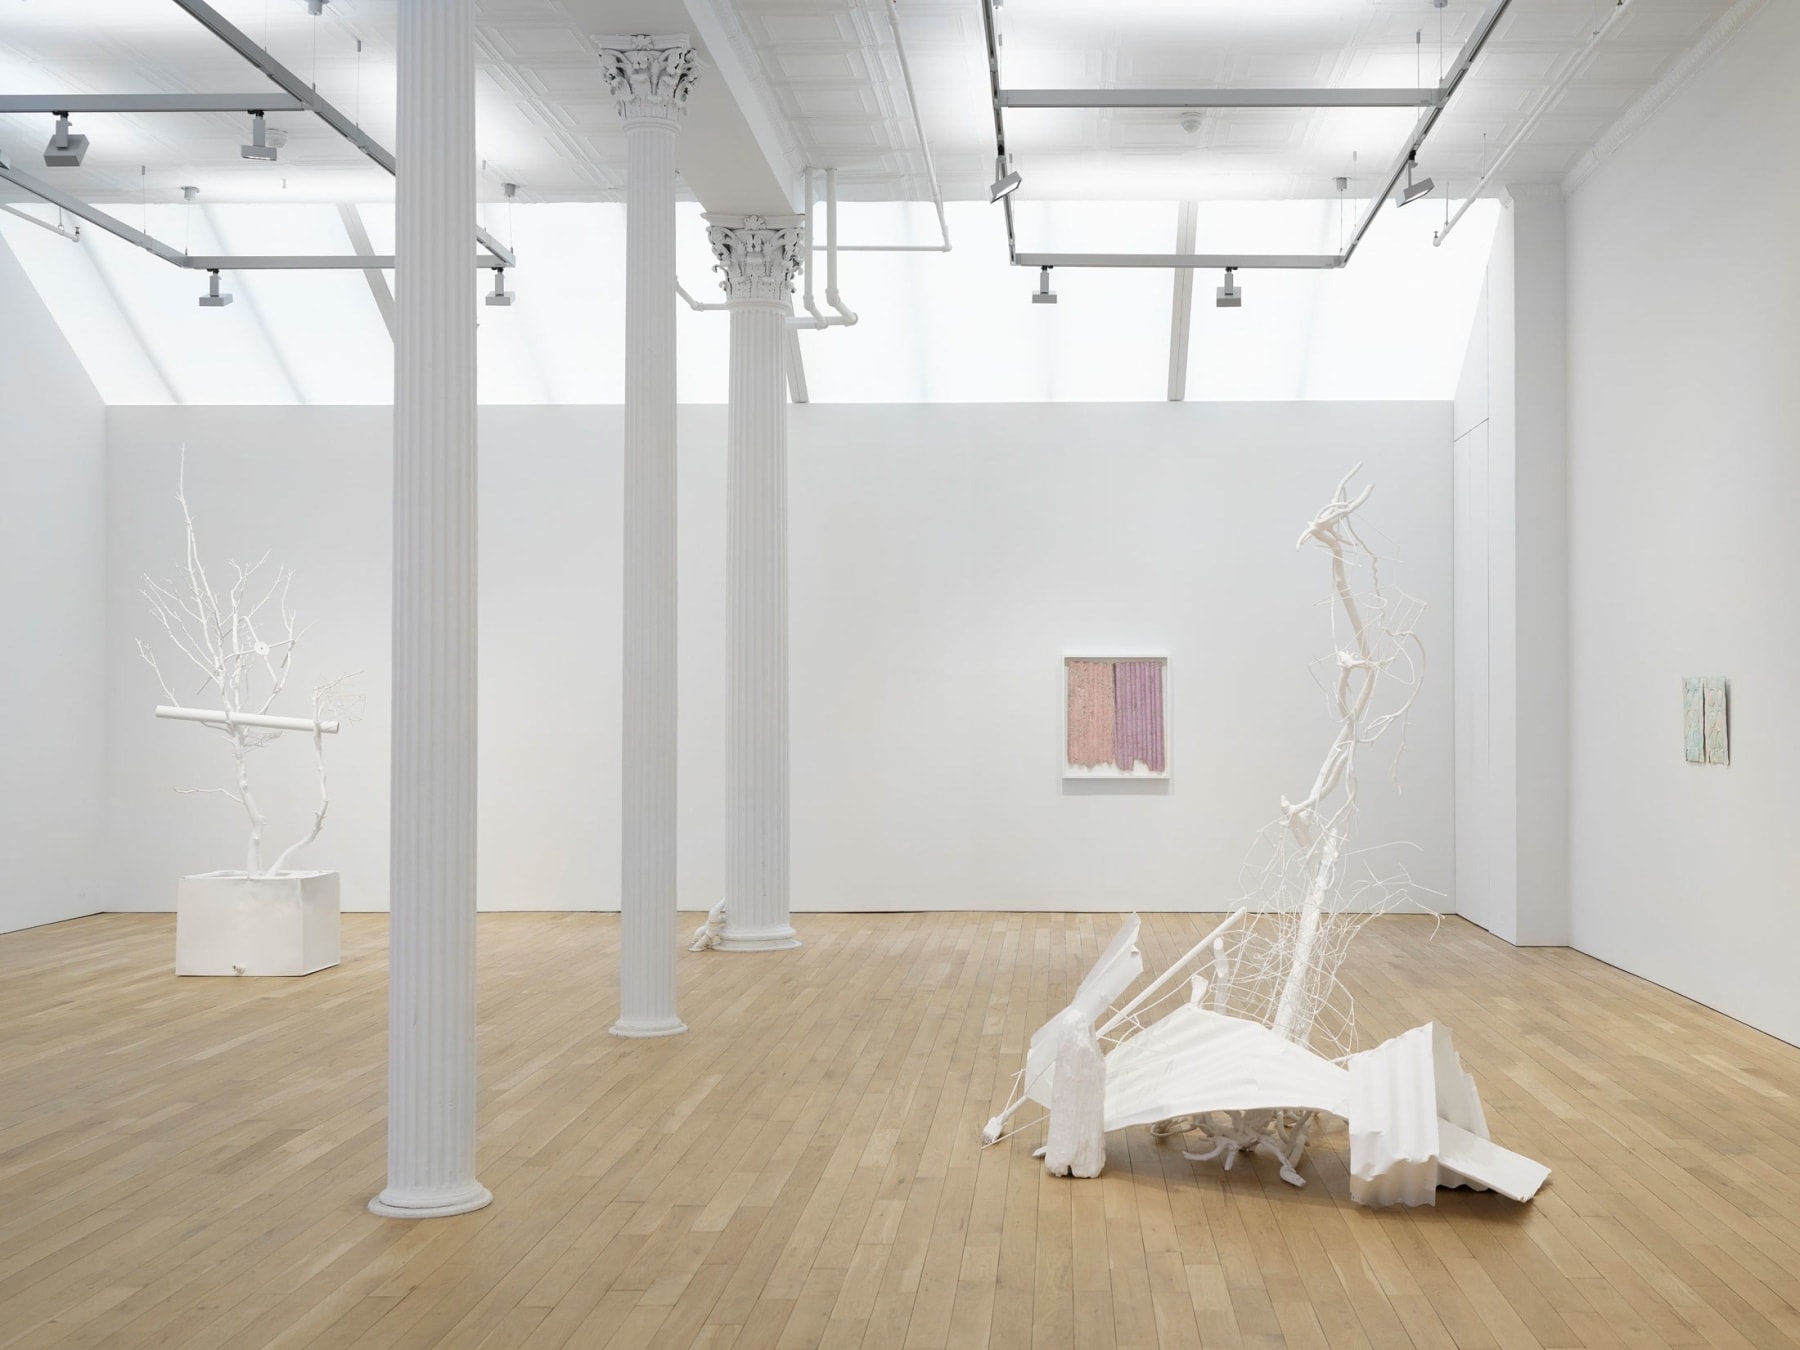 installation of white sculptures in a gallery